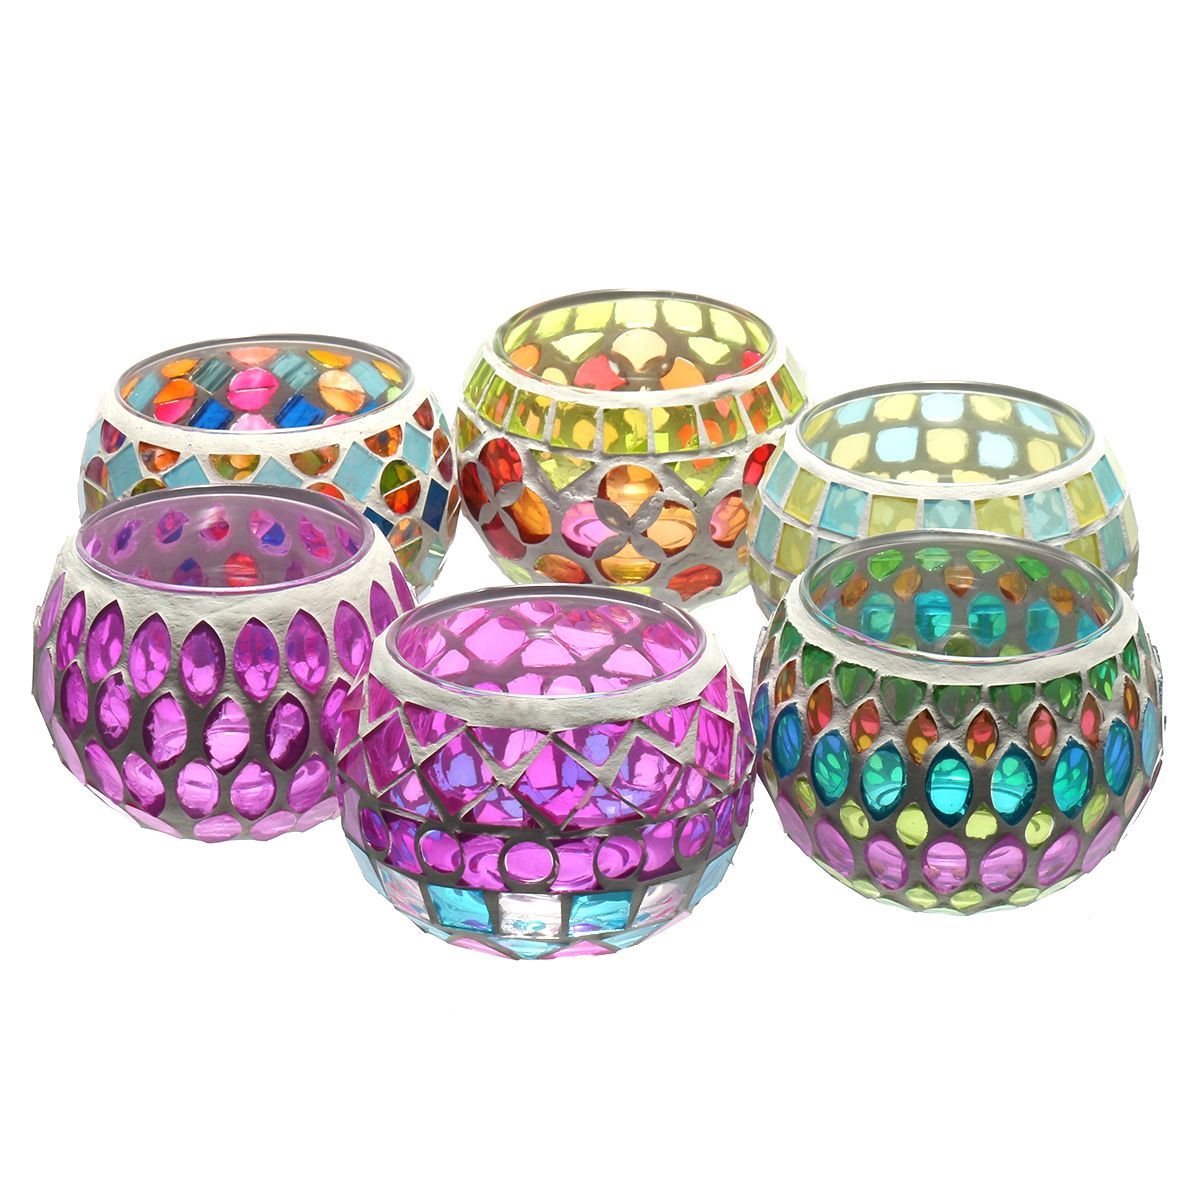 Glass-Candle-Holder-Tealight-Table-Home-Room-Wedding-Decorations-Gift-1166275